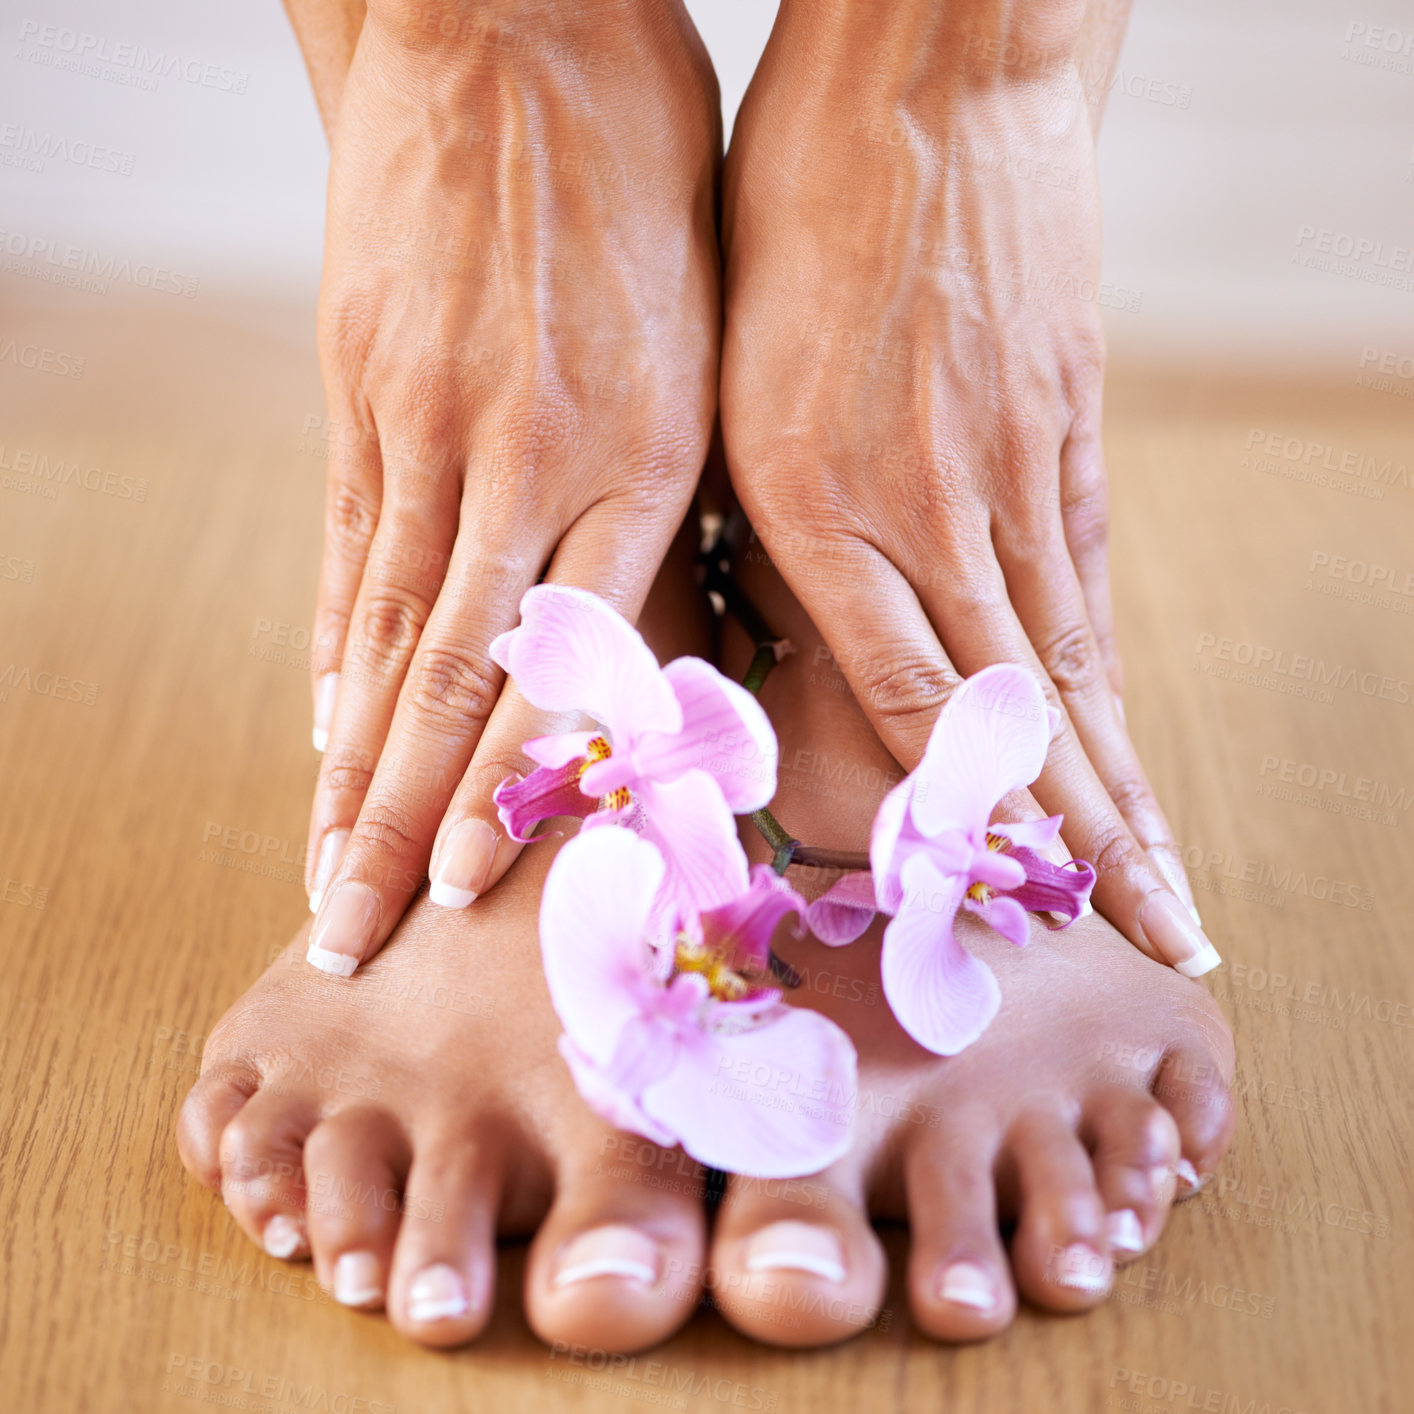 Buy stock photo Skincare girl and hands with flowers on feet for luxury cosmetic treatment with manicure and pedicure nails. Healthy skin of black woman with orchid for beauty, wellness and pamper lifestyle.

